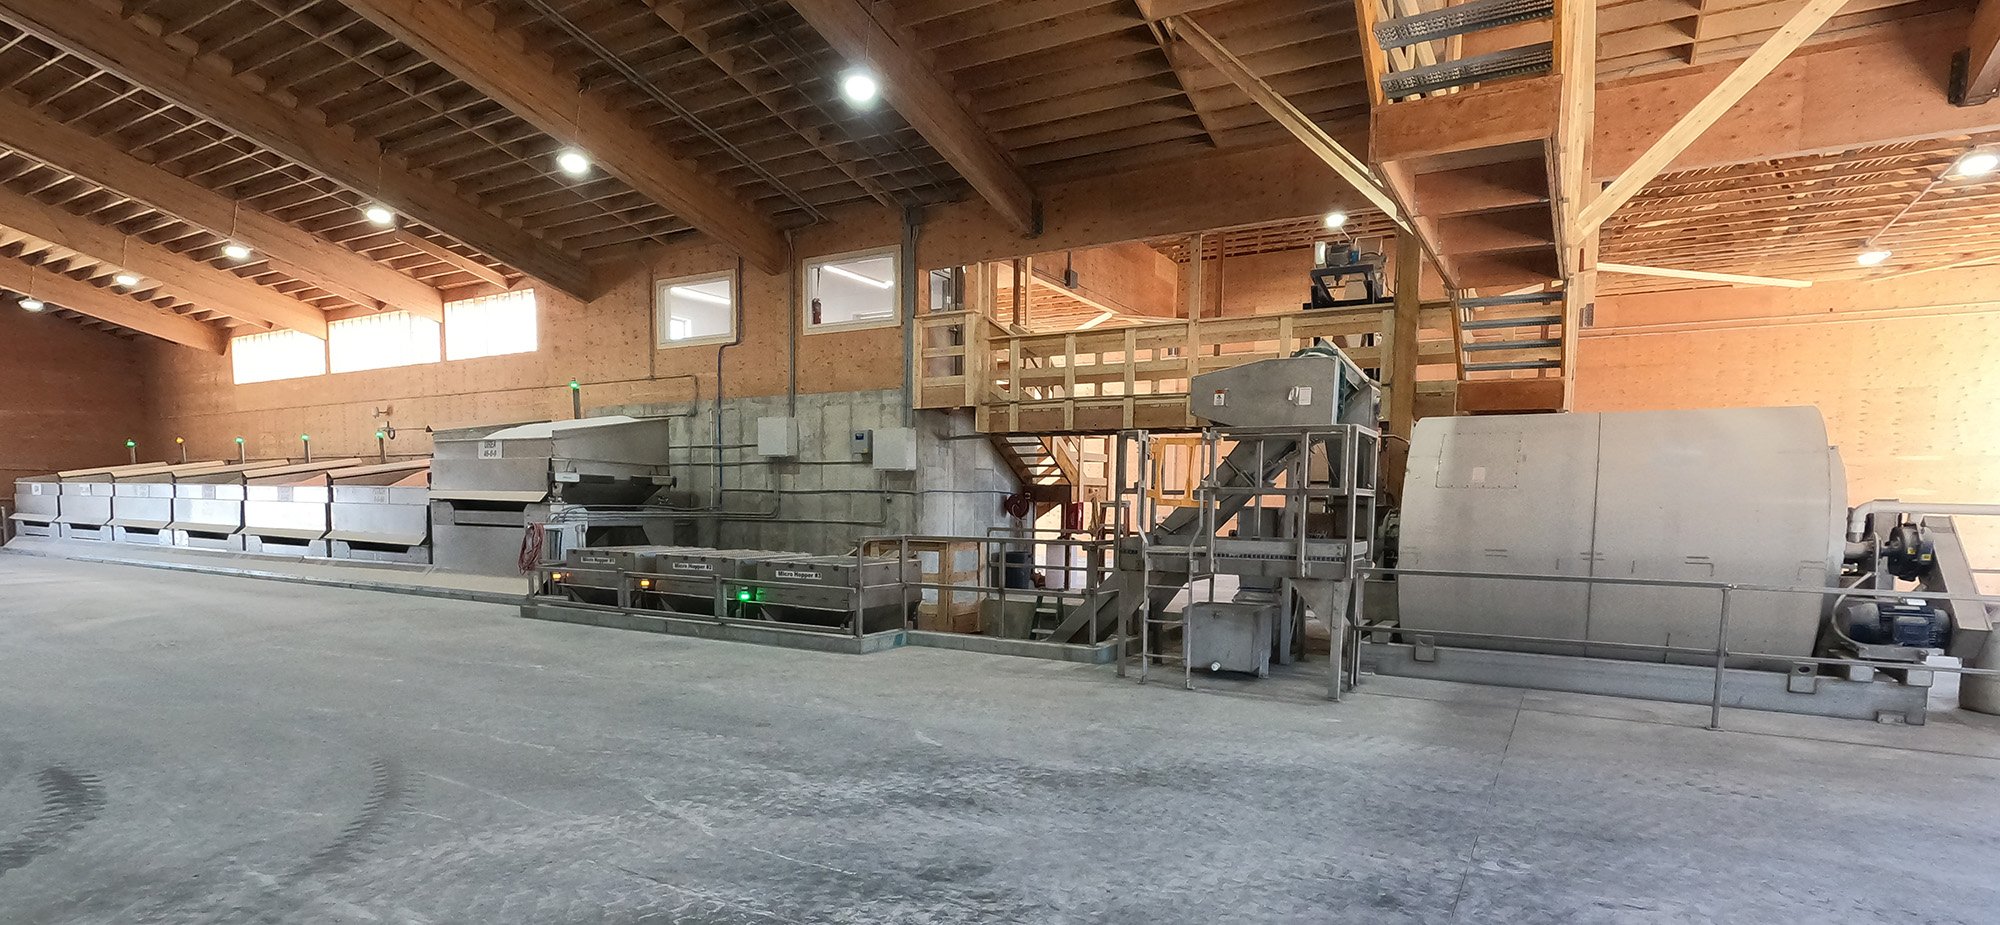  The Kahler system controls a multi-bin system that features scales, discharge gates, conveyors, and an 8-ton orbital mixer. The system has six main bins, one swing, and three micro bins. 